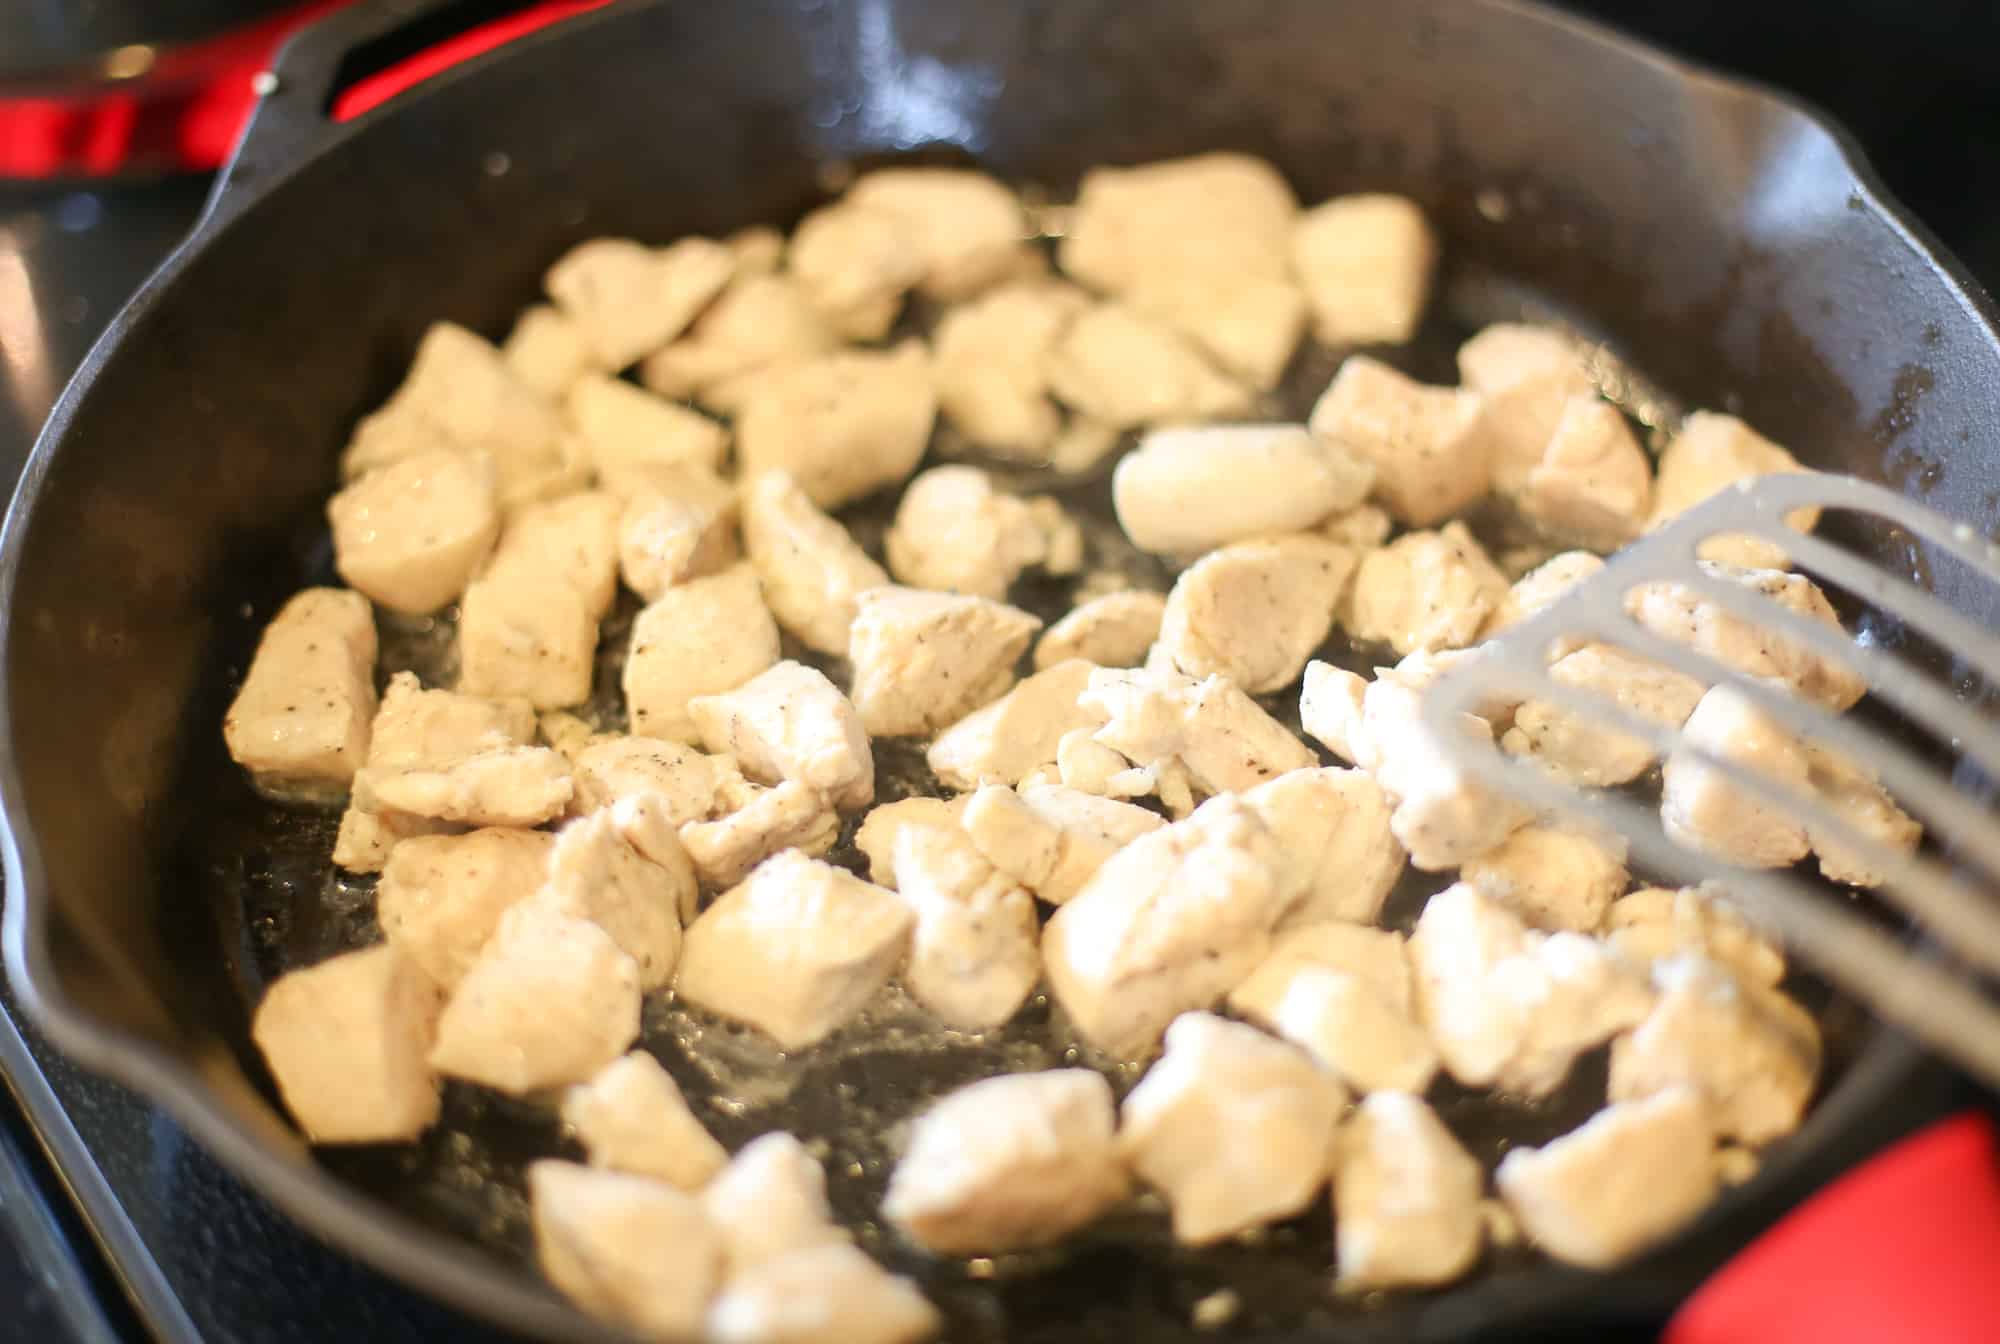 Diced chicken being sauteed in a cast iron skillet.